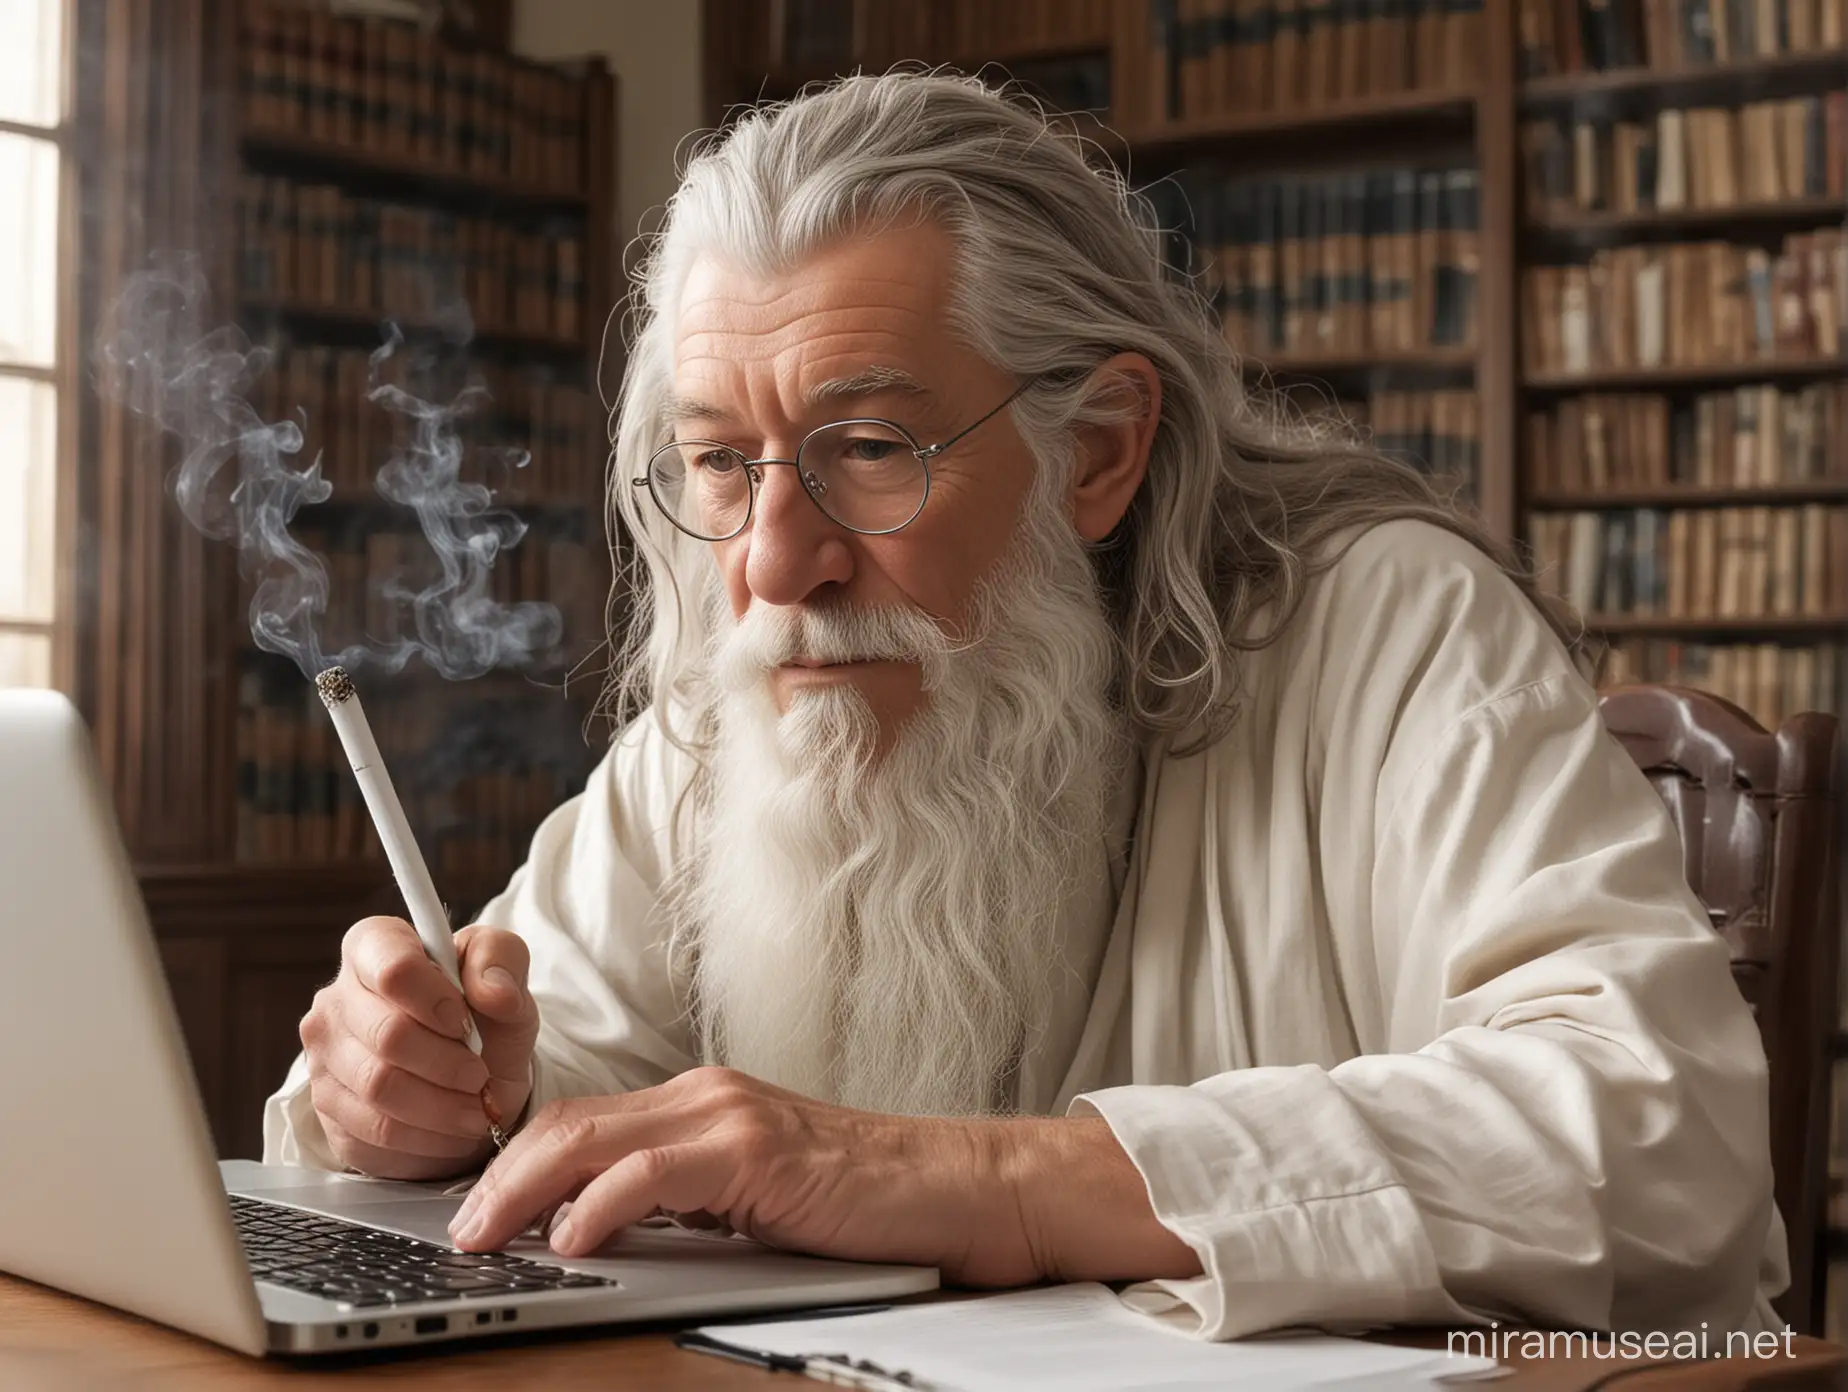 Gandalf in white working on his macbook and smoking a classic pipe in his old school brightly lit office that also looks like a library. Put some nerdy looking glasses on gandalf